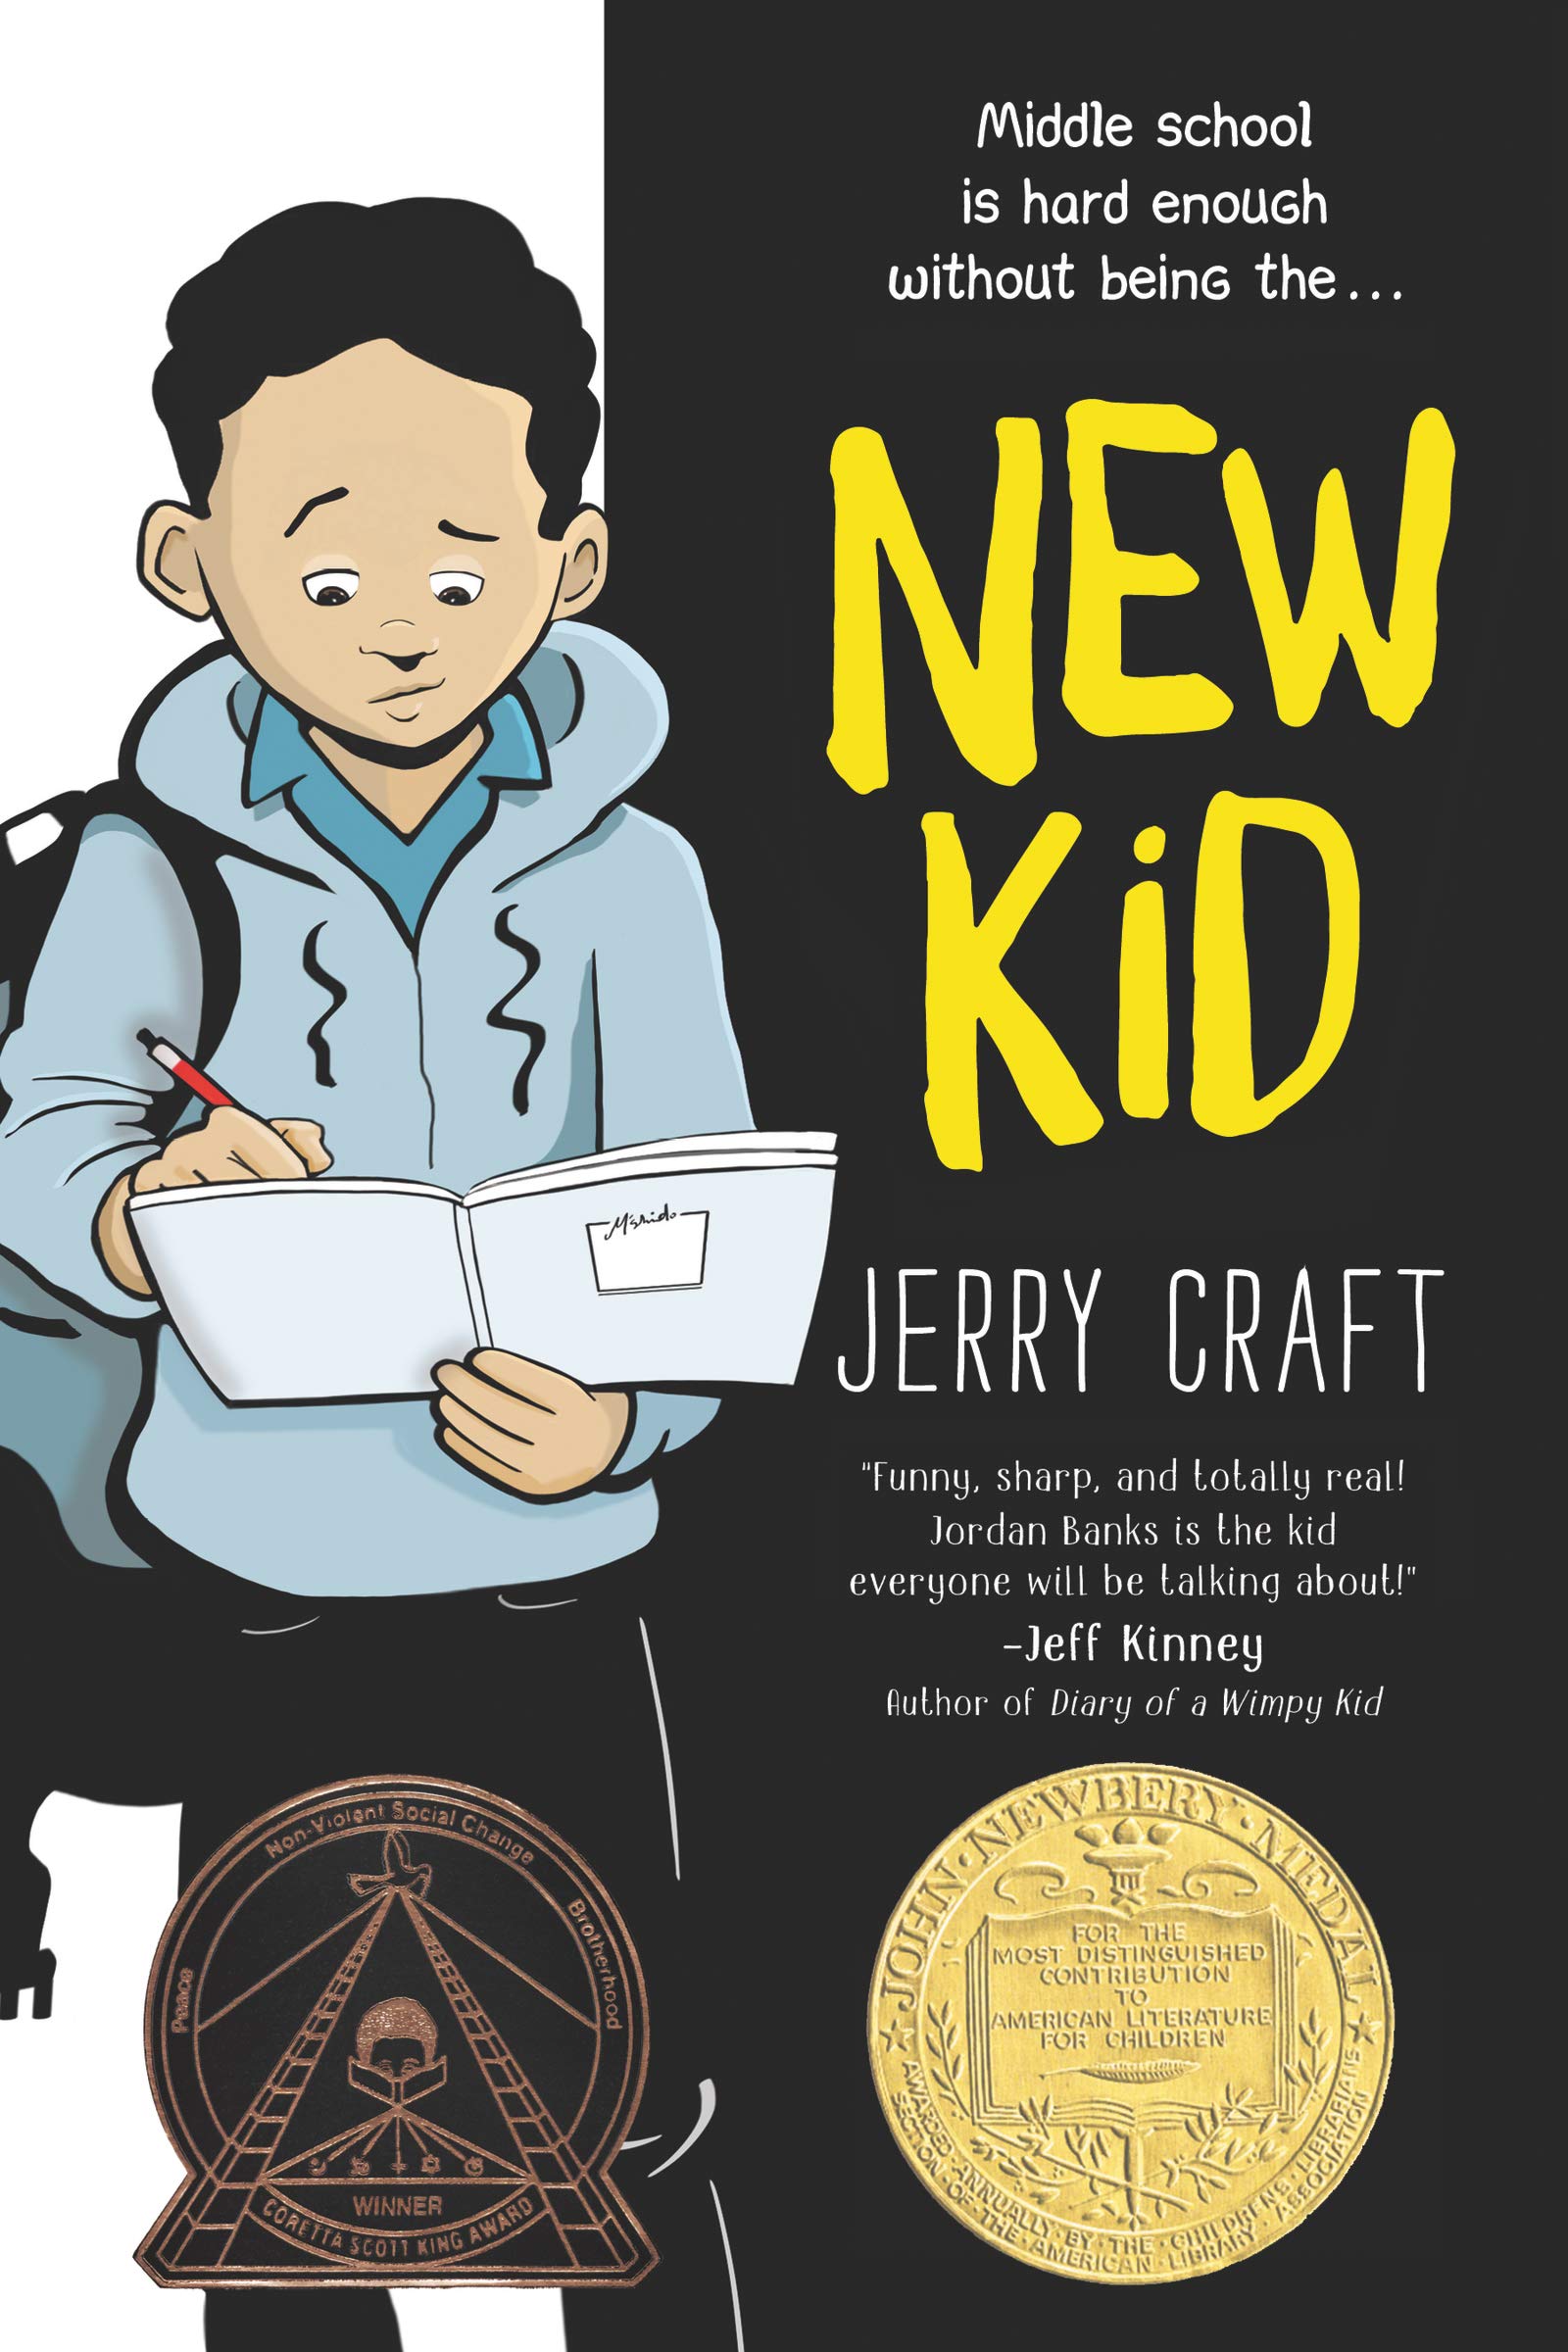 Book Cover of New Kid by Jerry Craft 